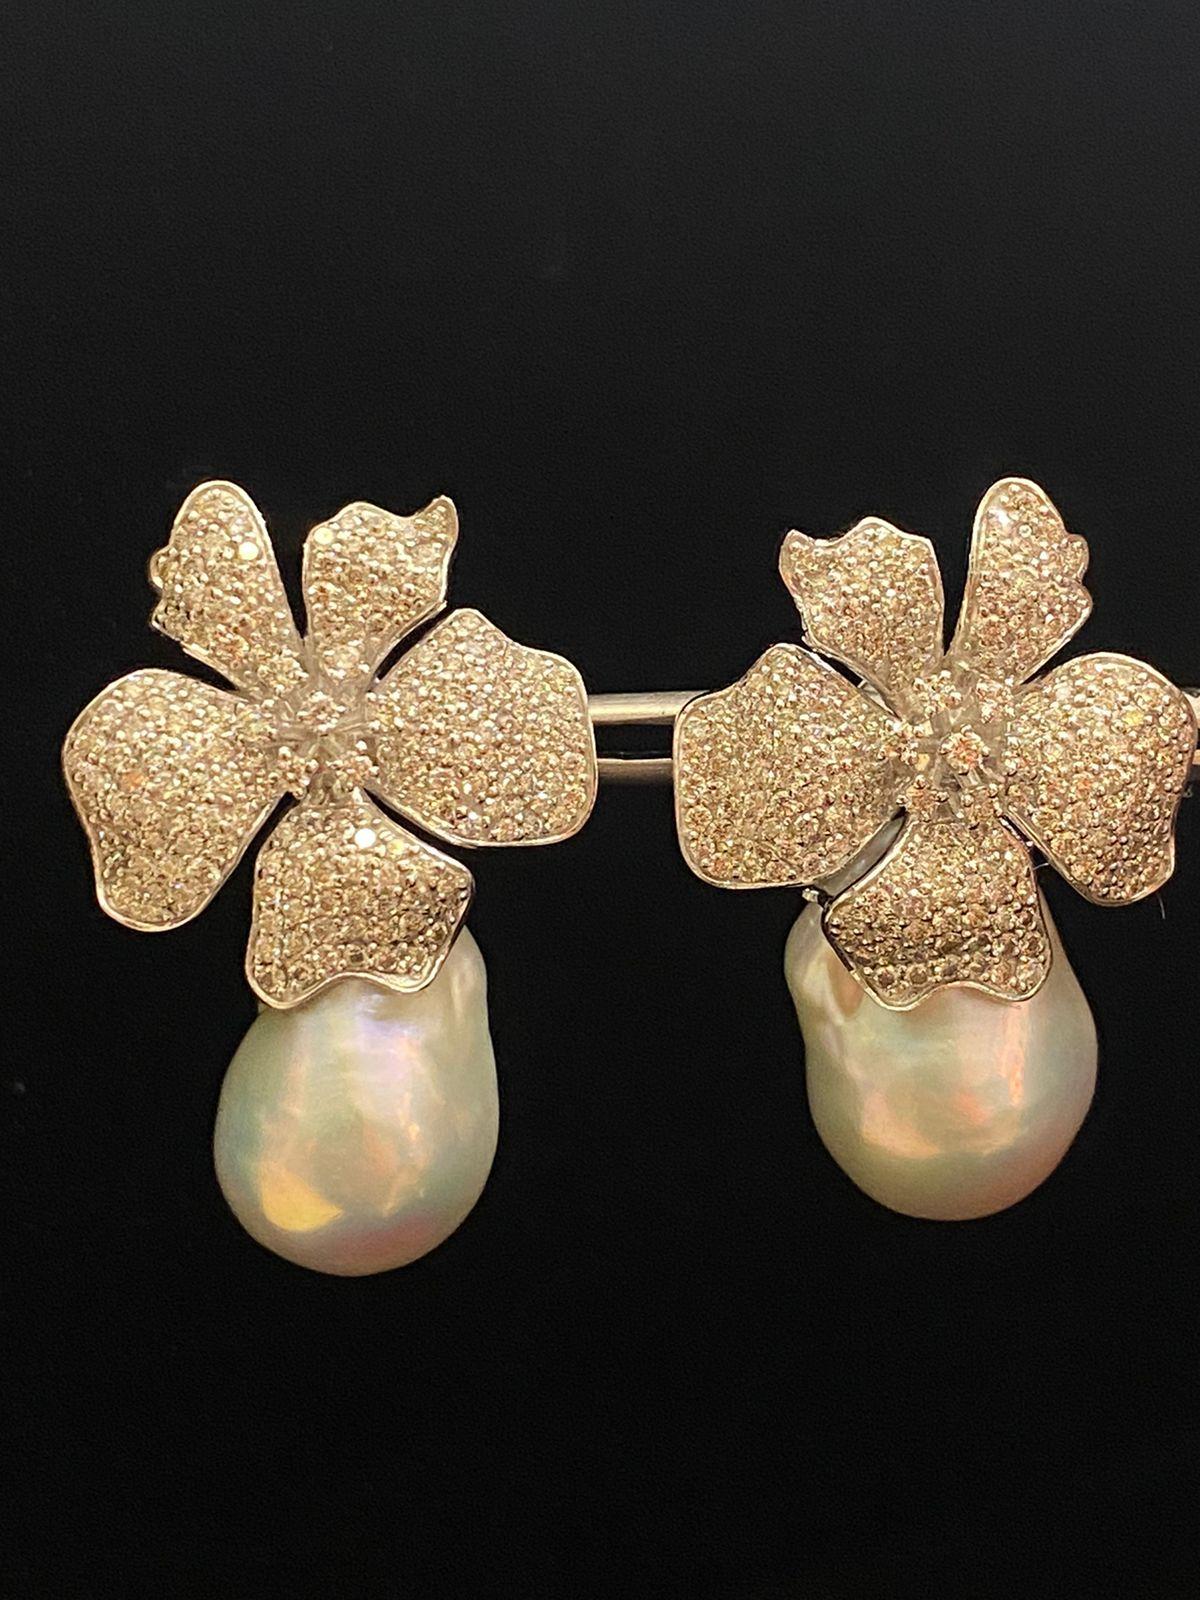 Round Cut Exquisite Ct 51 of Natural Mother of Pearls and Diamonds on Earrings For Sale